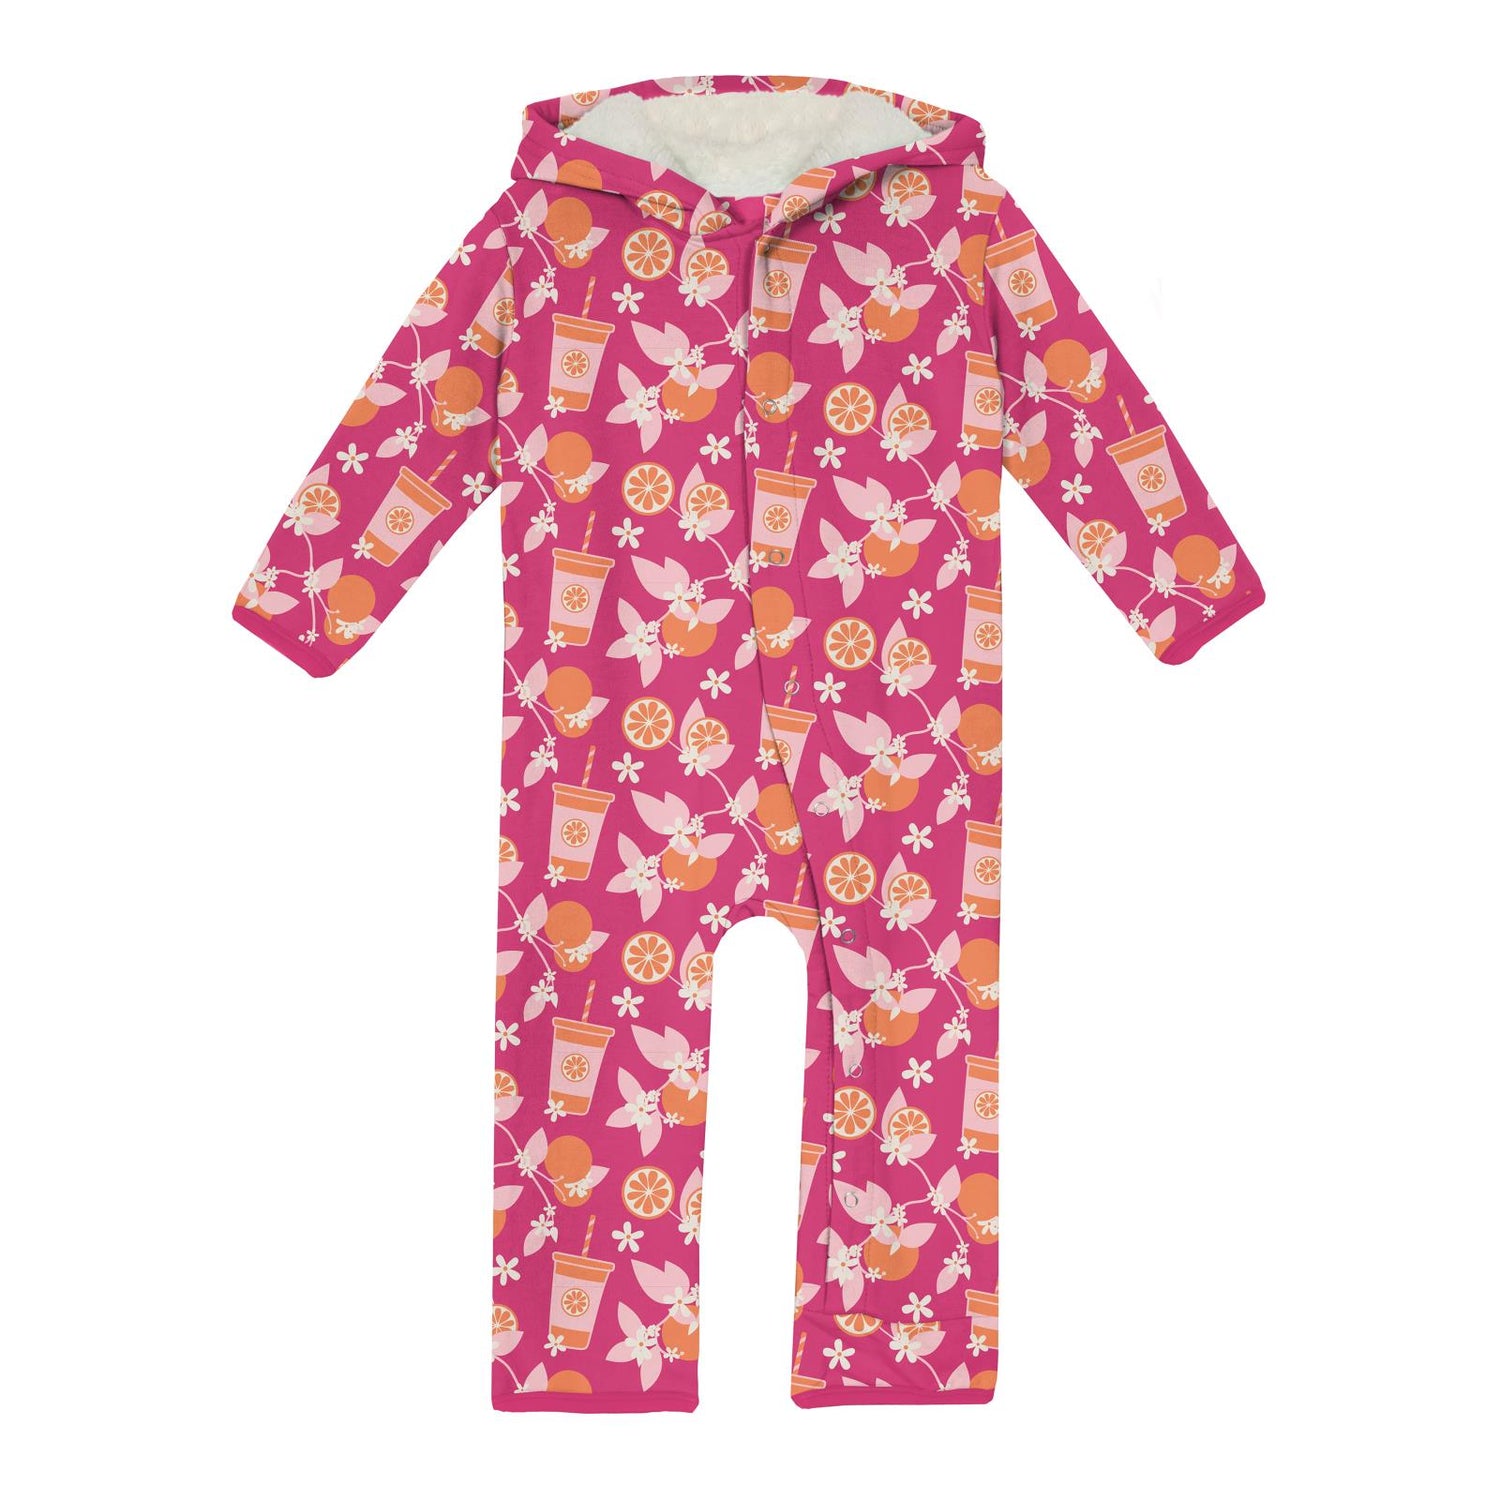 Print Fleece Coverall with Sherpa-Lined Hood and Ears in Calypso Orange Cream